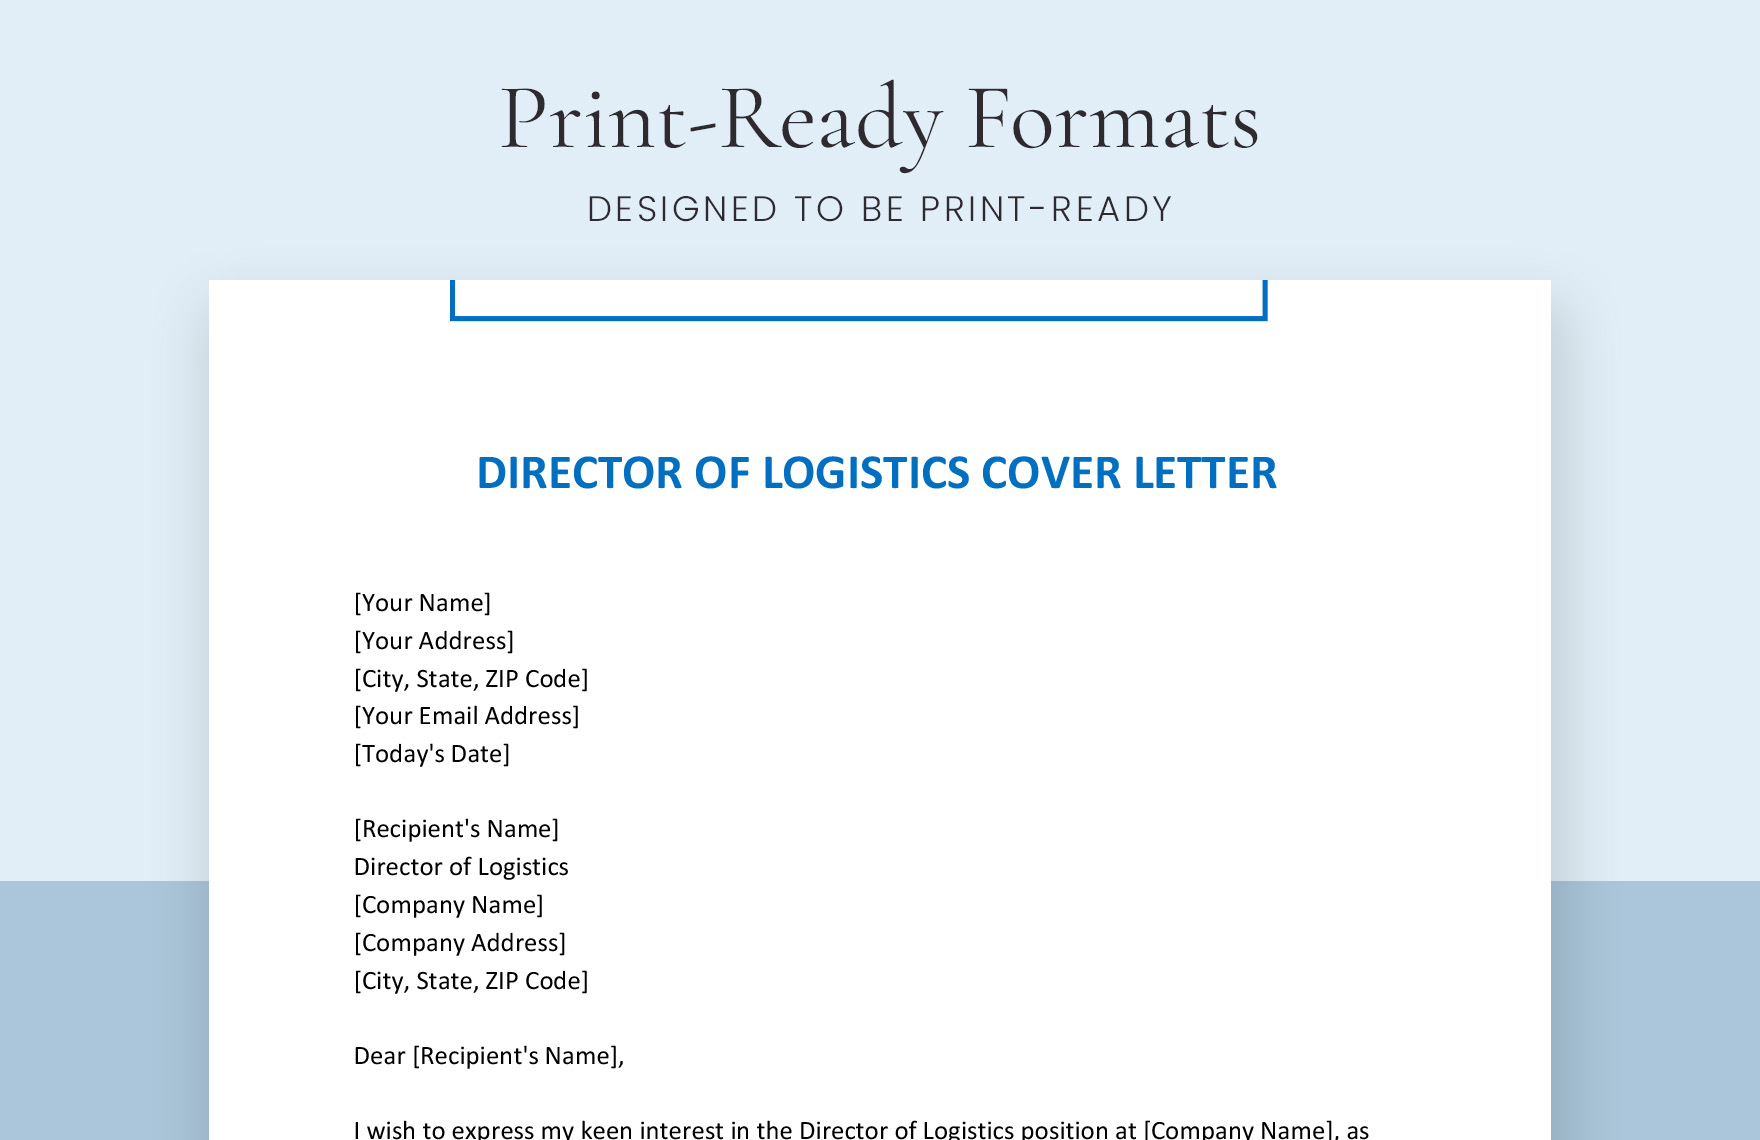 Director of Logistics Cover Letter